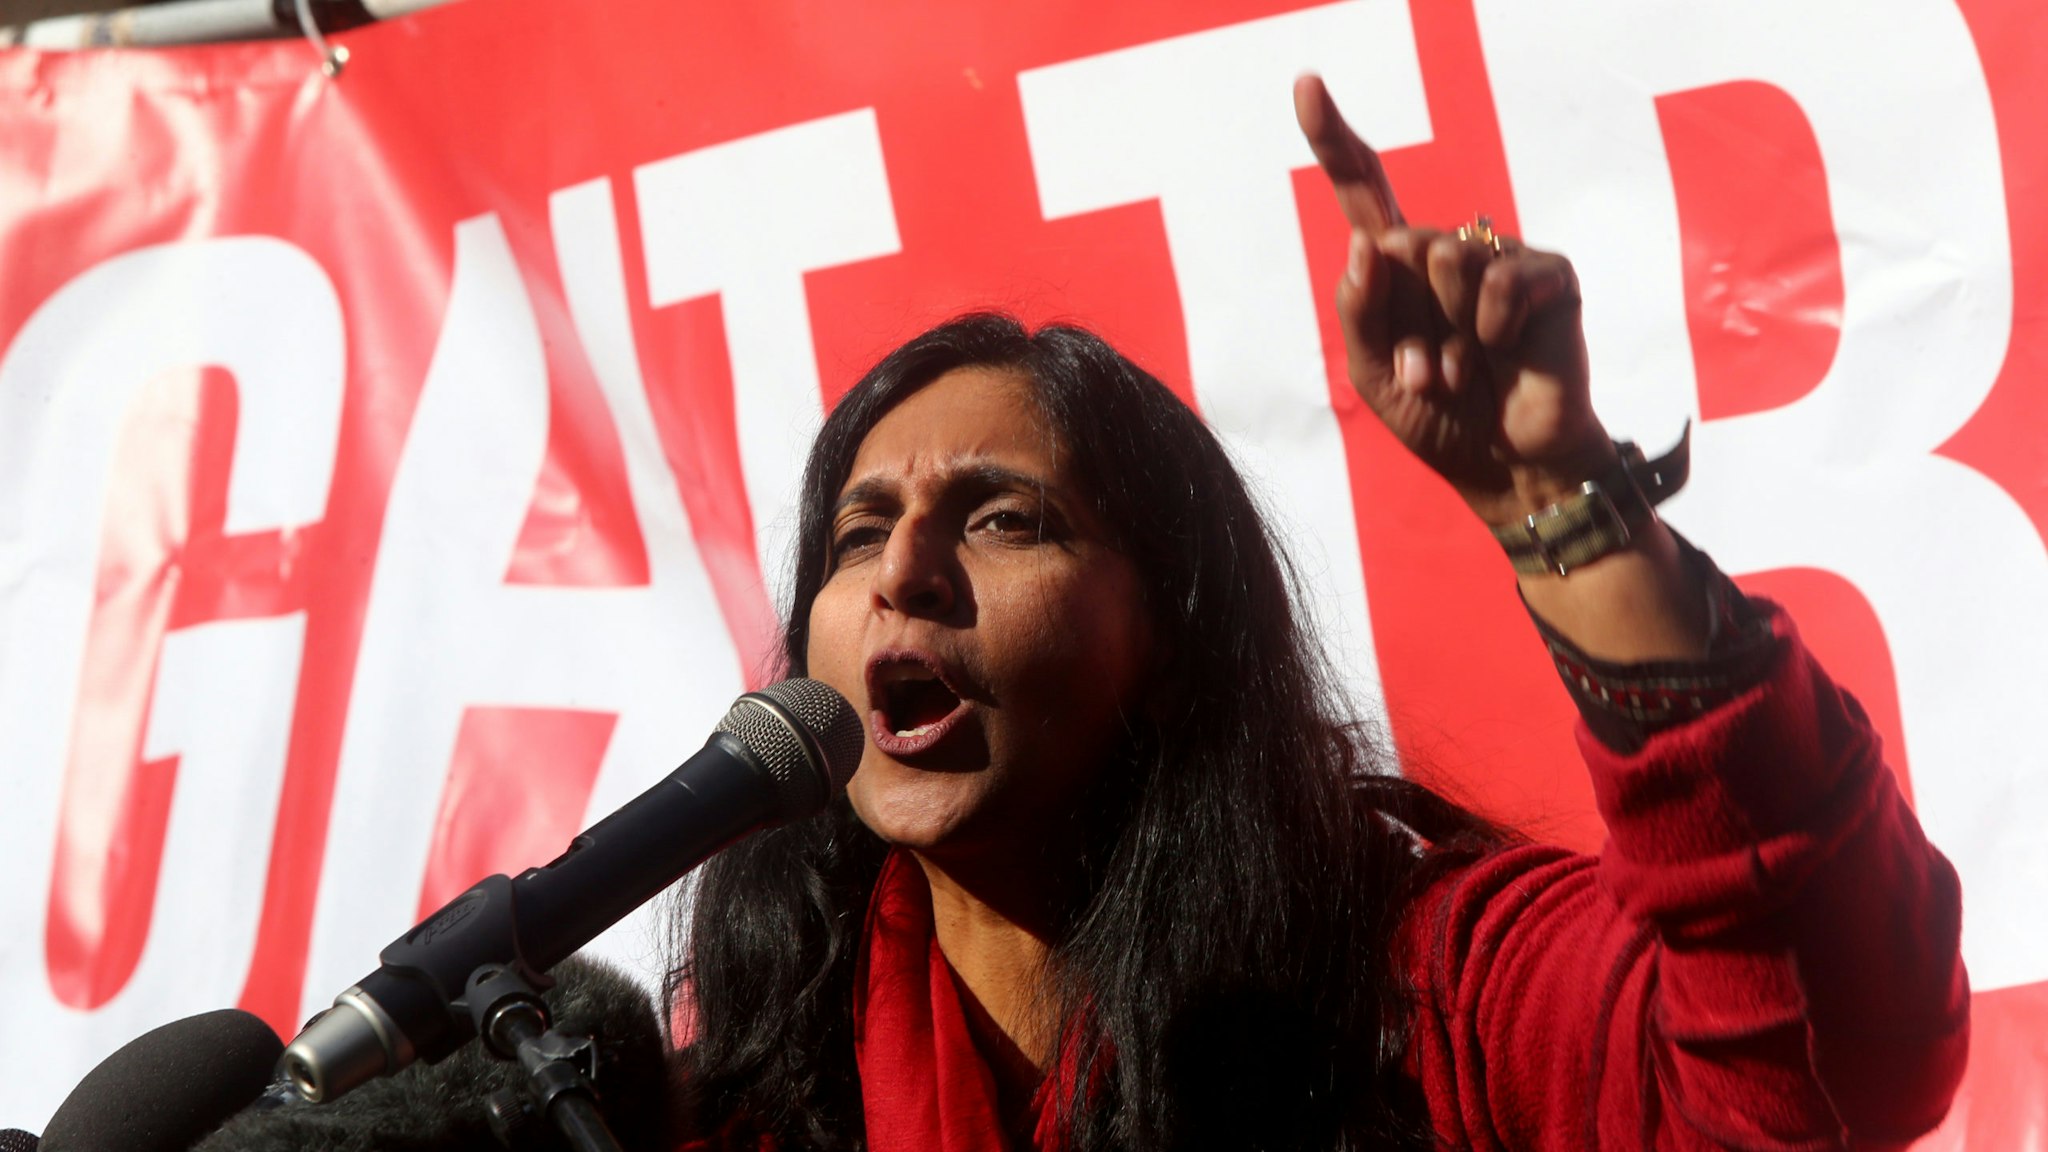 SEATTLE, WA - FEBRUARY 17: Seattle City Council member Kshama Sawant speaks at a rally held outside the courthouse where U.S. District Court for the Western District of Washington at Seattle is hearing Daniel Ramirez Medina v. U.S. Department of Homeland Security on February 17, 2017 in Seattle, Washington. Medina, who was protected by the Deferred Action for Childhood Arrivals (DACA) program, was arrested by Immigration and Customs Enforcement (ICE) on Tuesday. (Photo by Karen Ducey/Getty Images)